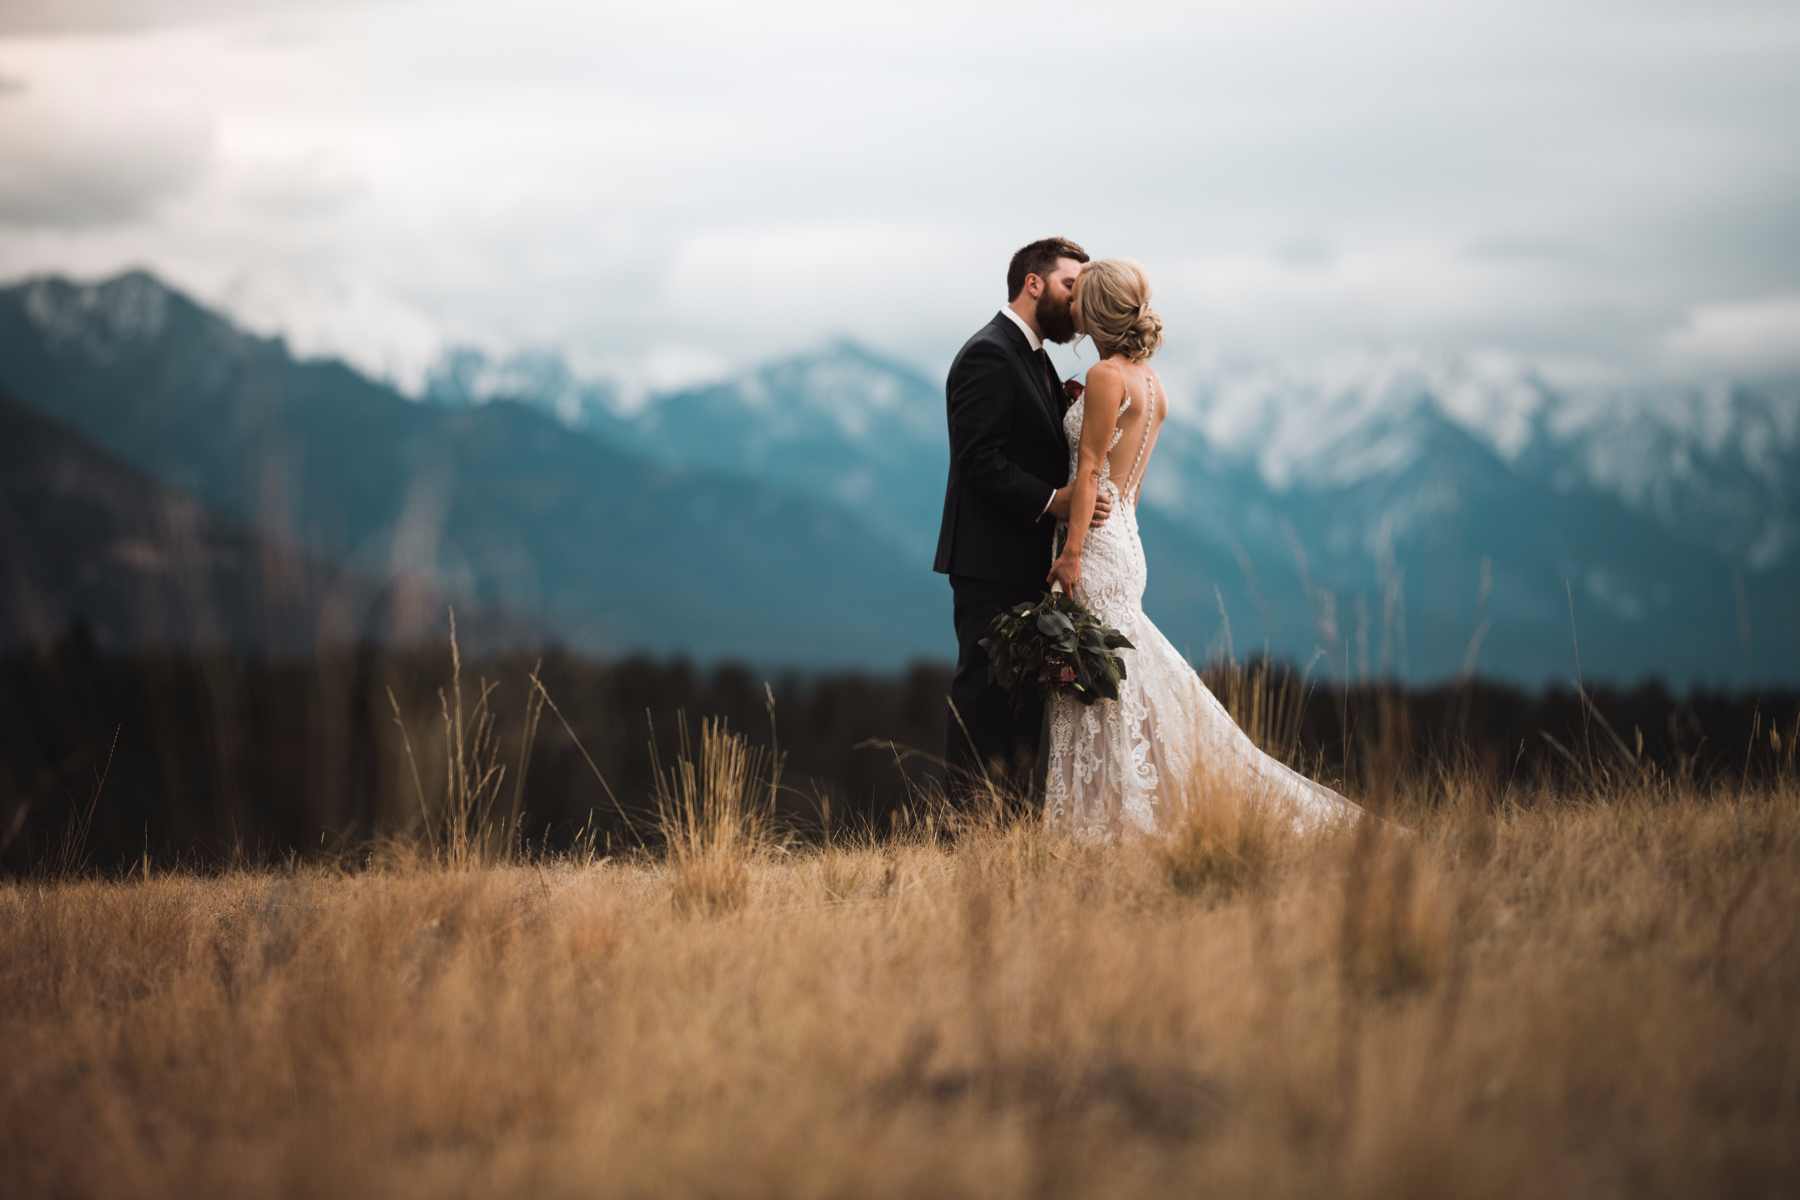 Calgary wedding photographer in Invermere for adventurous mountain destination elopement at Eagle Ranch Golf Resort, British Columbia - Newlyweds kissing in field with mountains